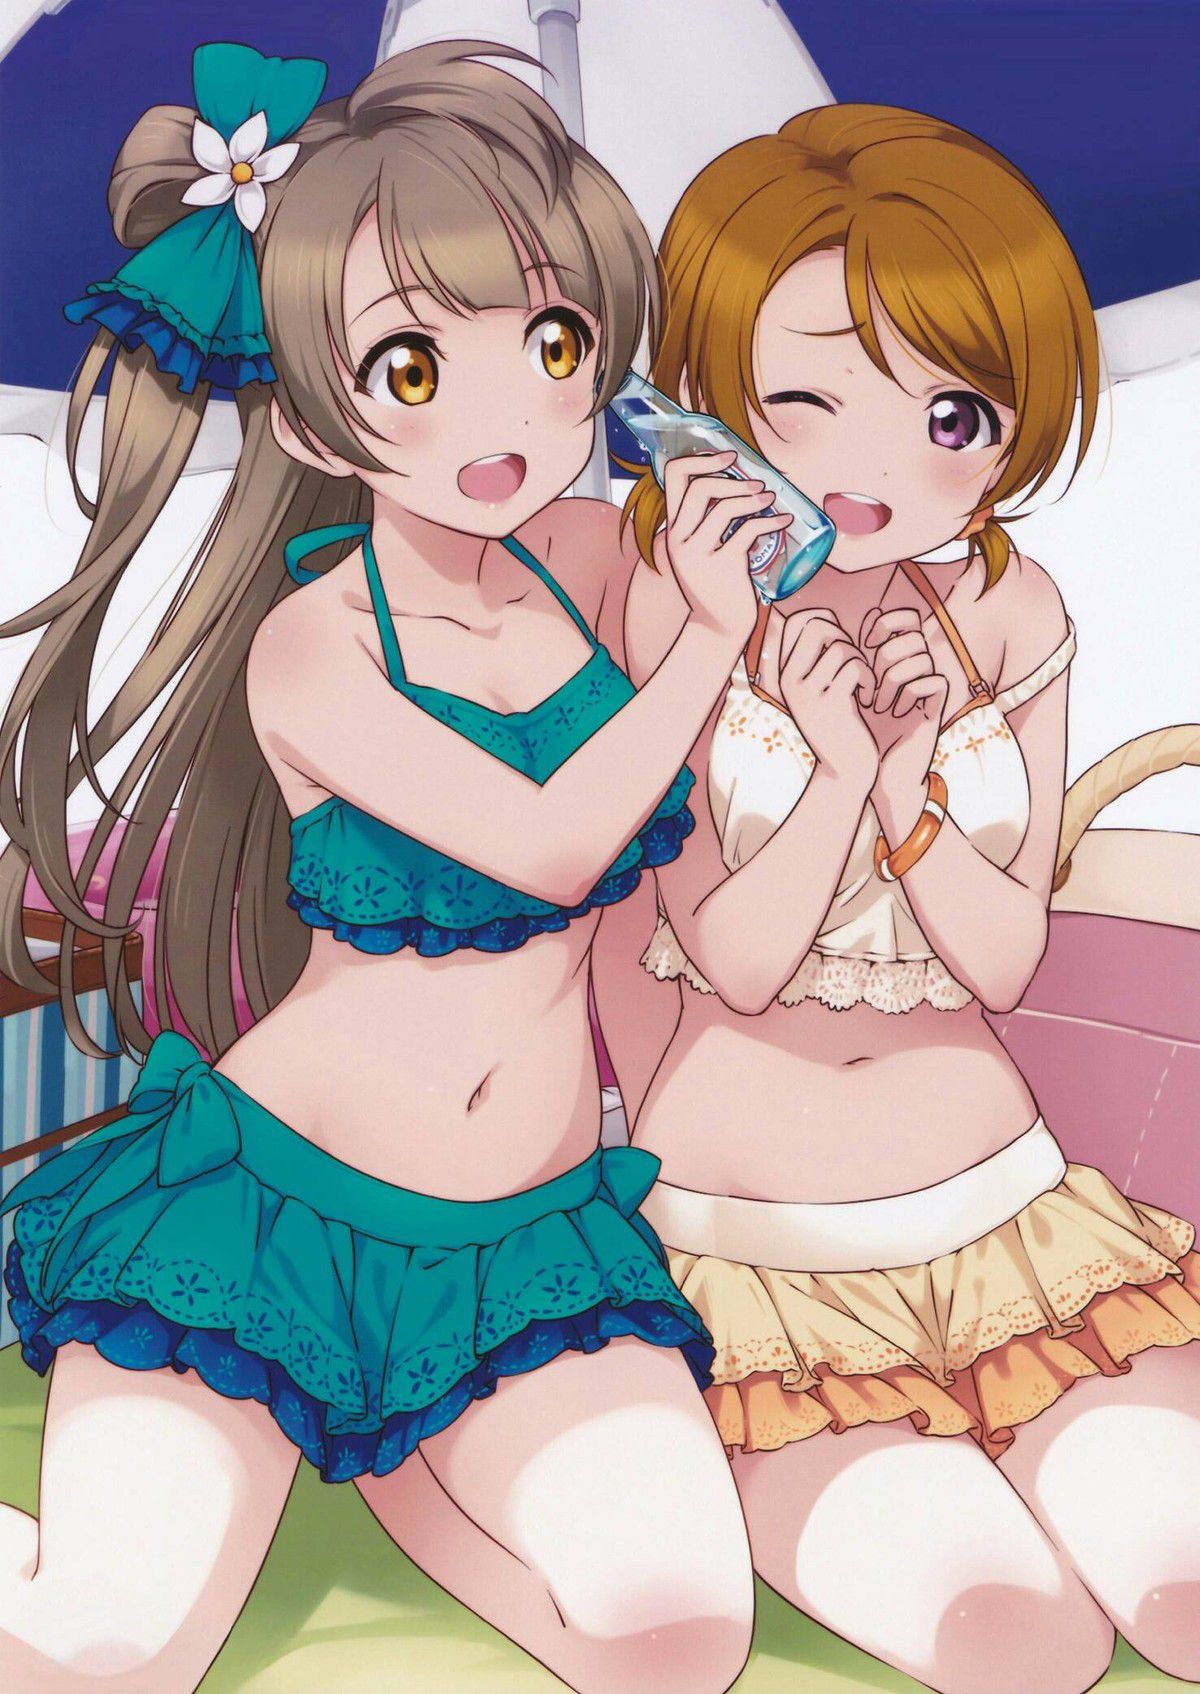 [Goddess images] "love live! "Of or's Chin as erotic pretty unspectacular as good girls become mothers is not www 9